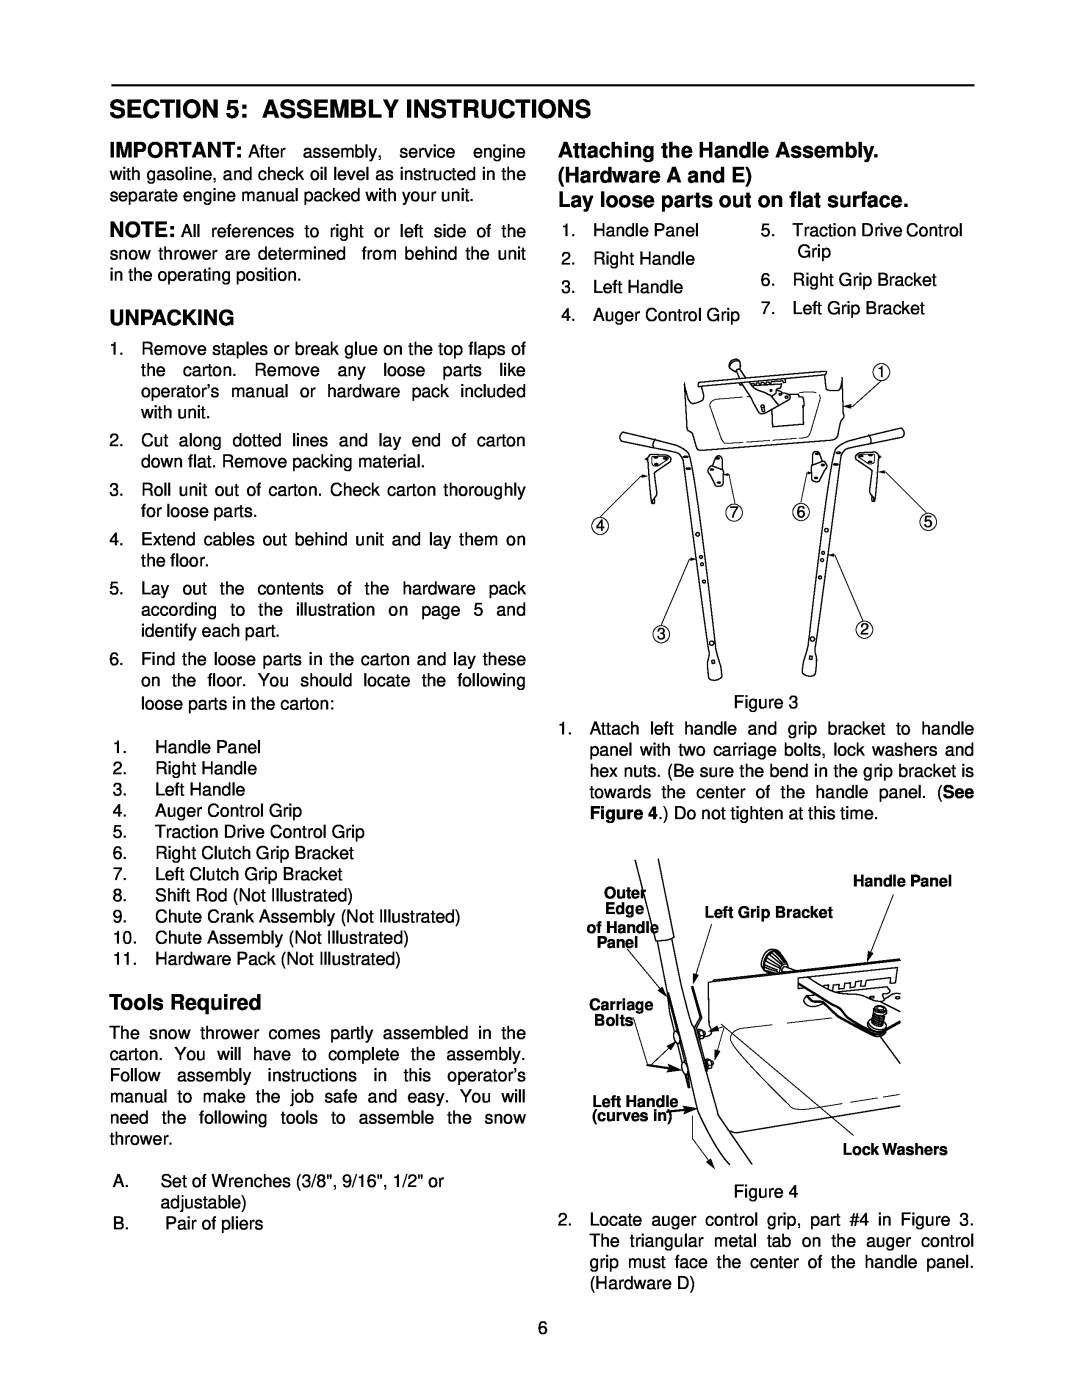 MTD E602E, E662E, E642F Assembly Instructions, Unpacking, Tools Required, Attaching the Handle Assembly. Hardware A and E 